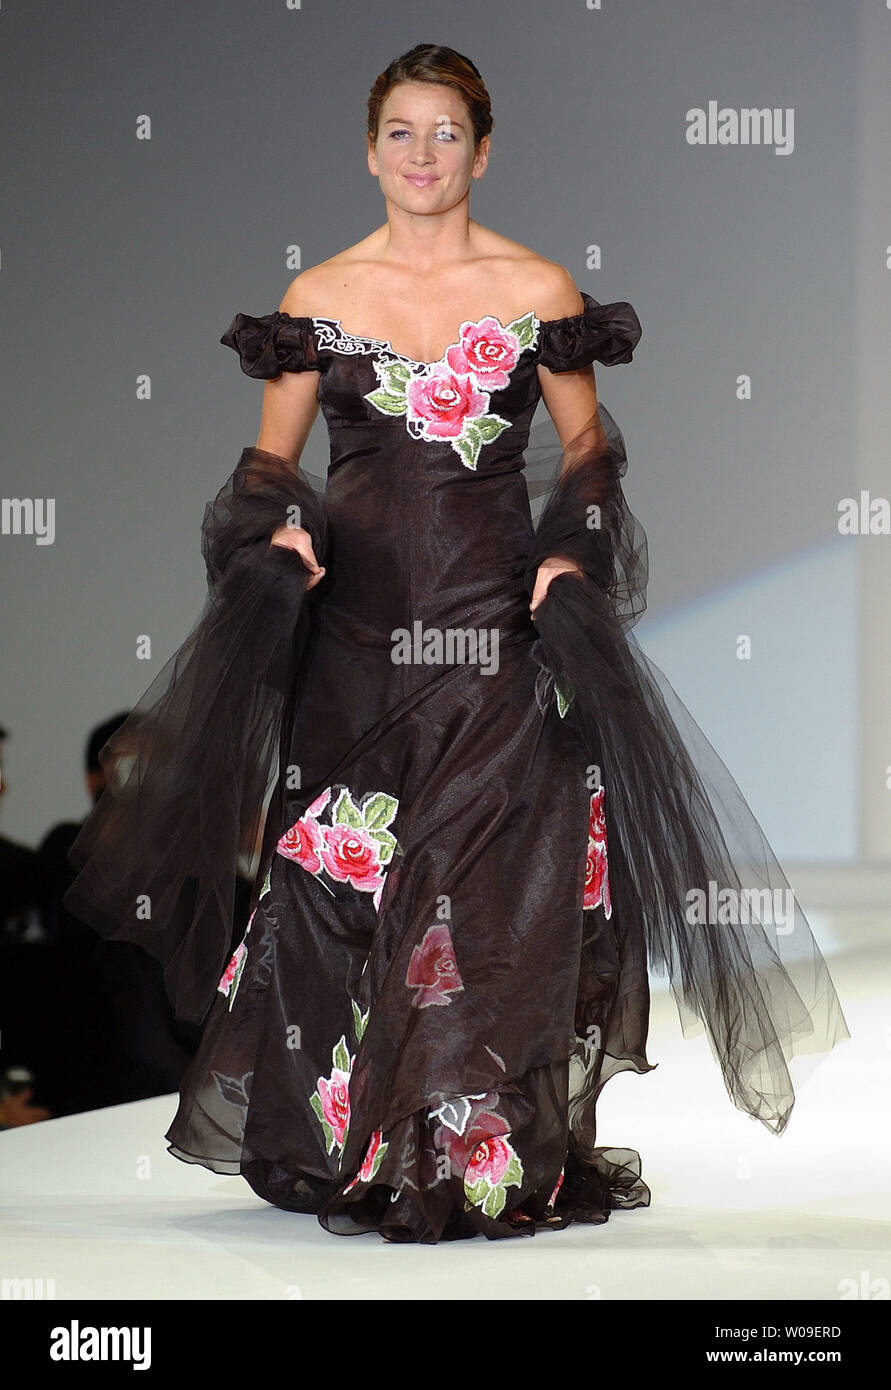 Merete Pedersen, a defender on Denmark's women's national team, walks down the catwalk wearing a creation by Andre Kim during a fashion show as part of the opening ceremony of the 2006 Peace Queen Cup (soccer) in Seoul, South Korea on October 27 2006.    (UPI Photo/Keizo Mori) Stock Photo